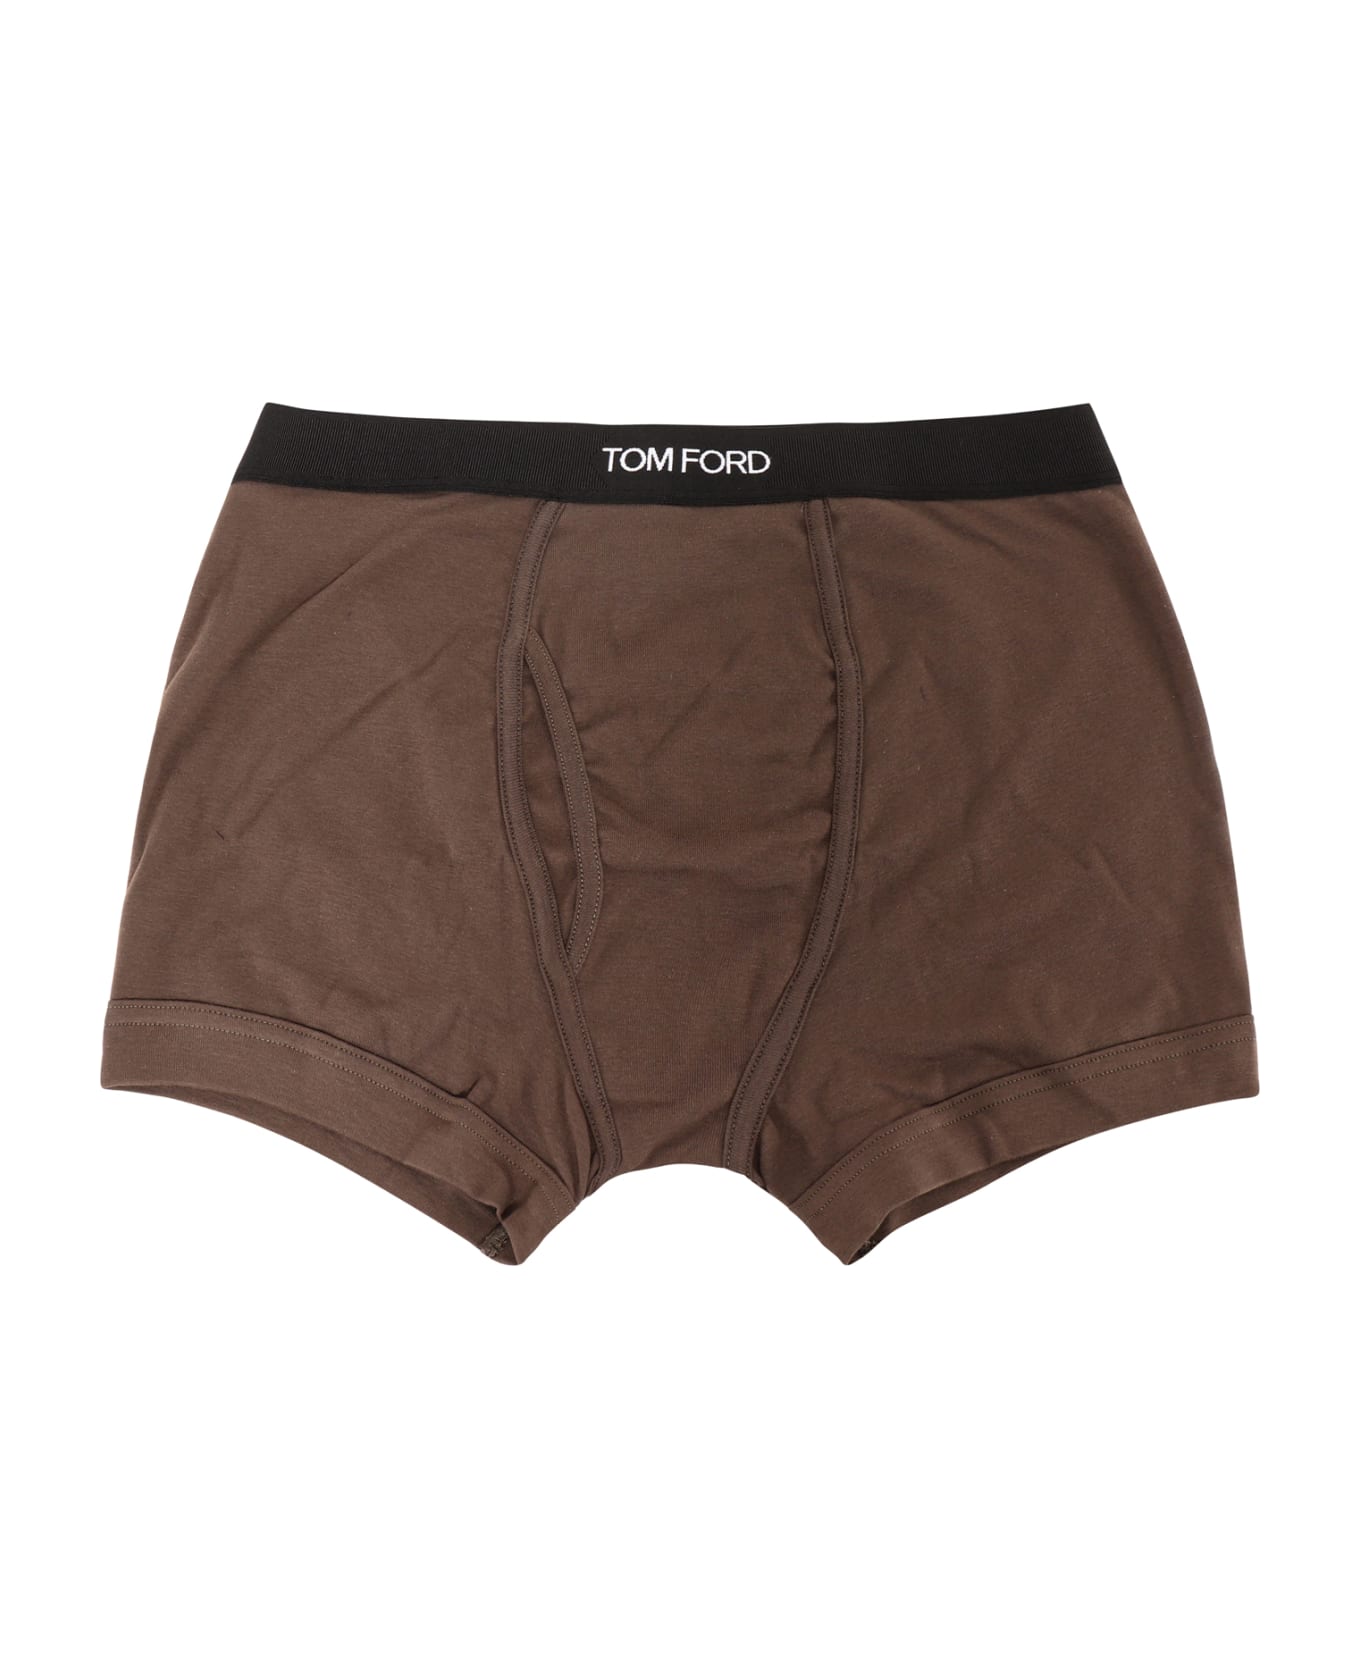 Tom Ford Boxer - Military Green